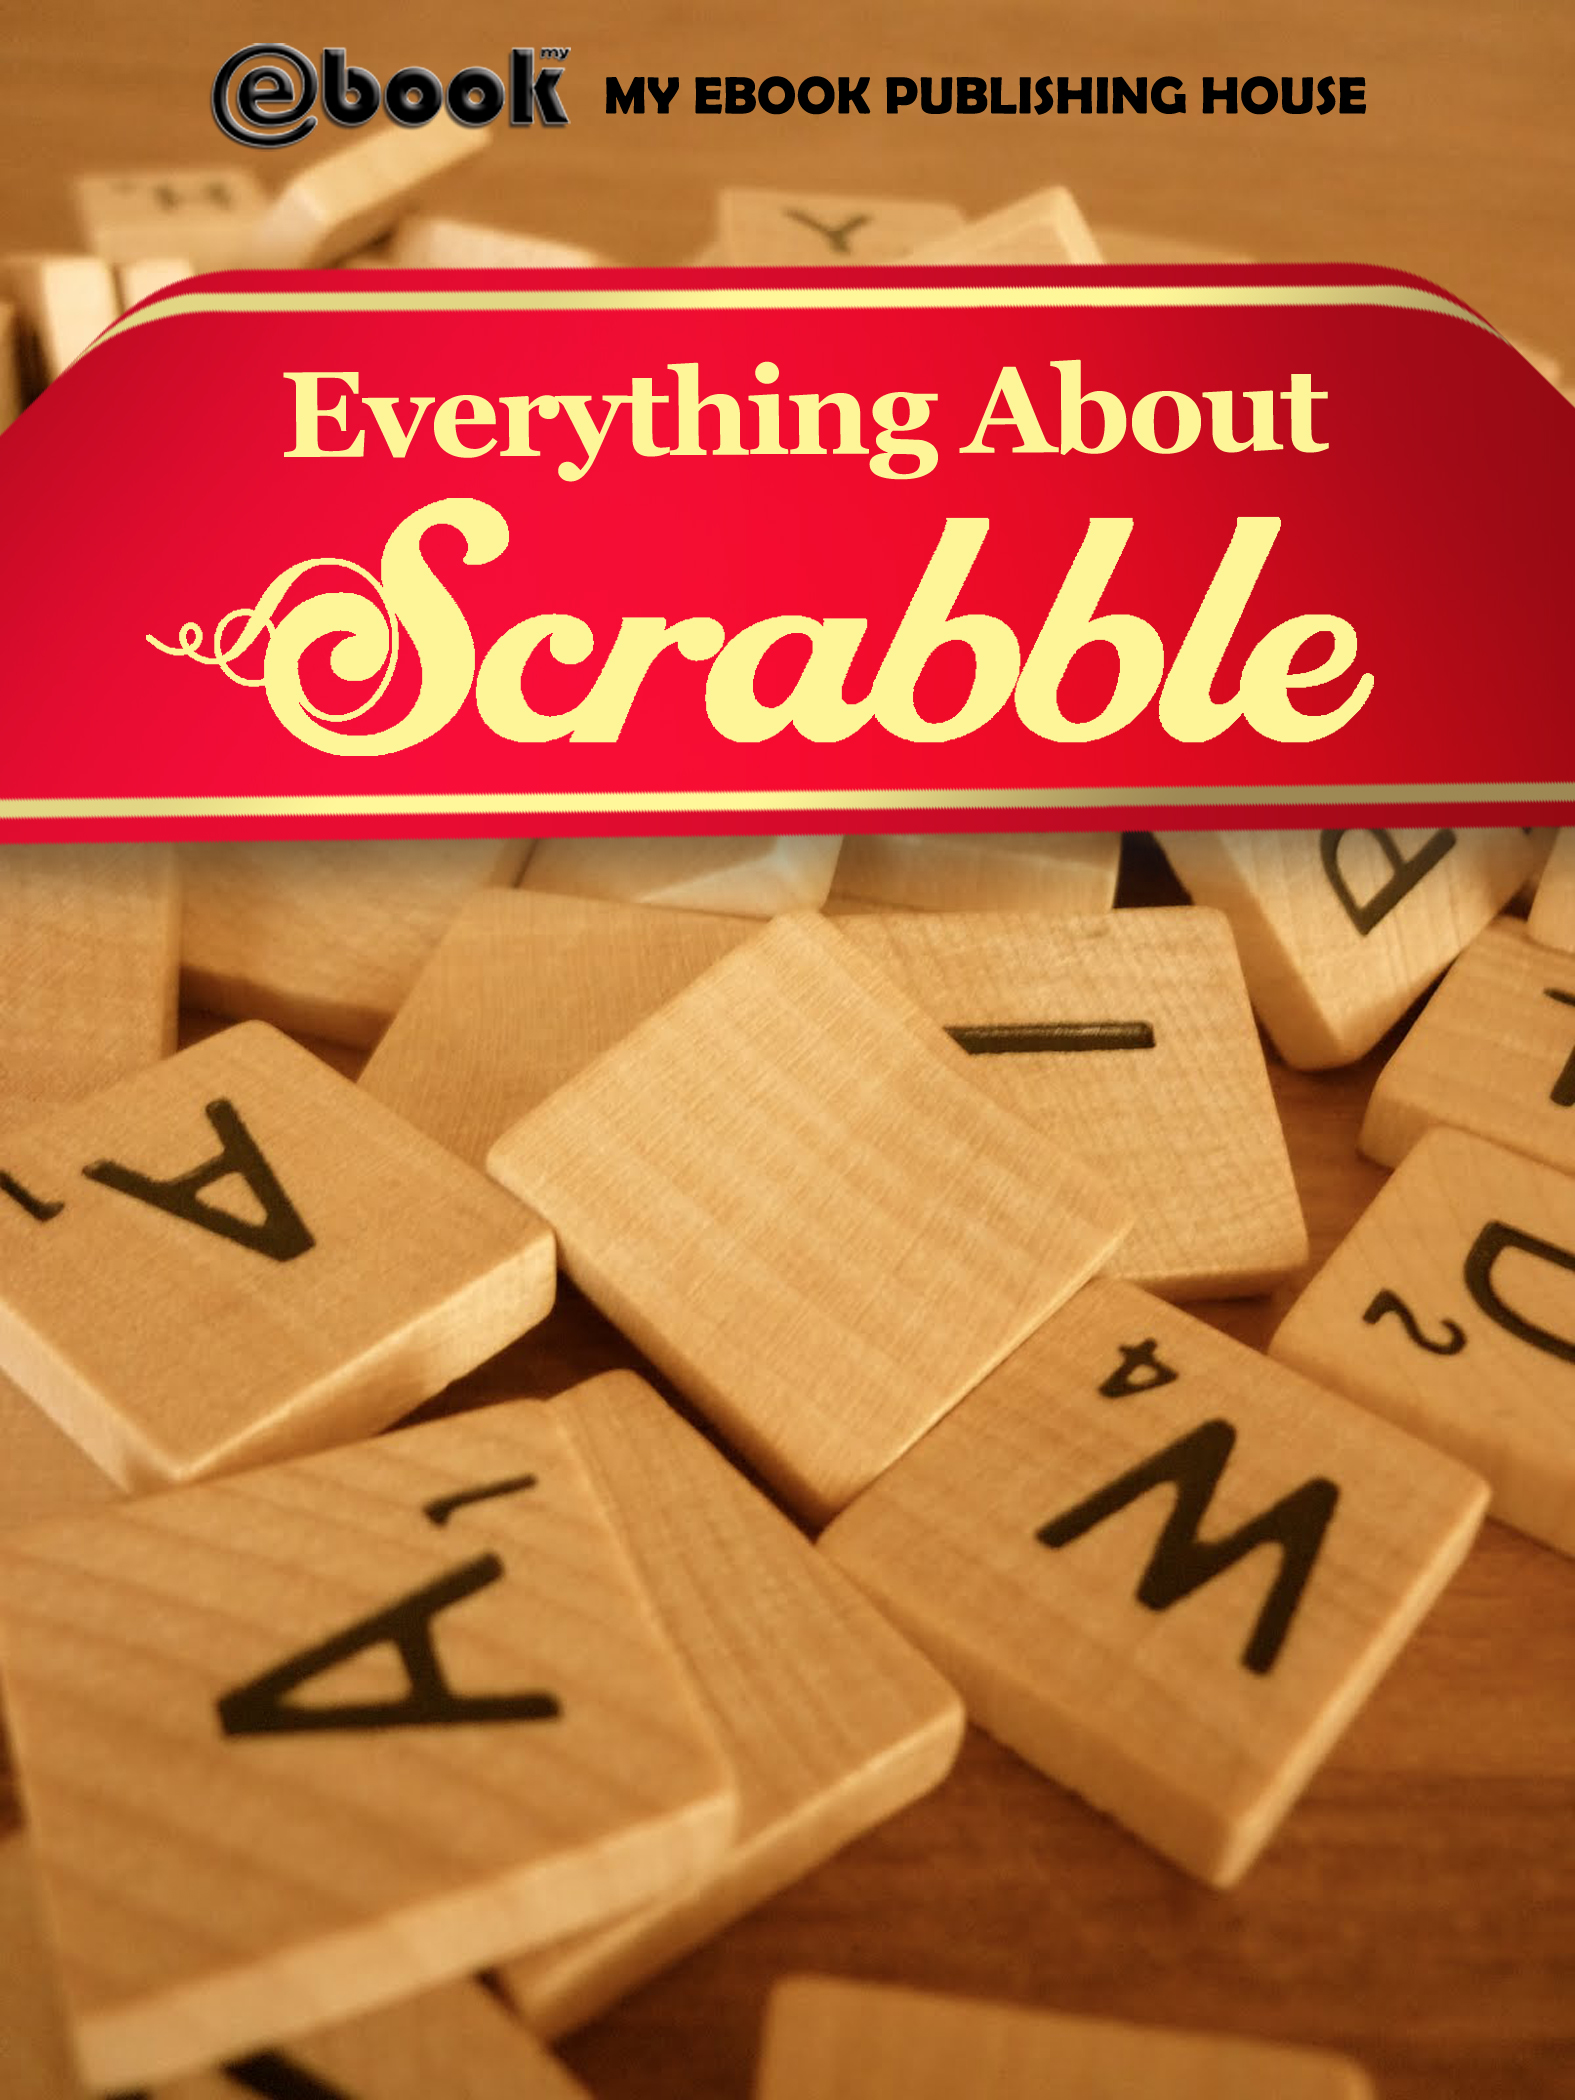 My e books. About Scrabble. Scrabble about books. Everything about everything. My ebook.